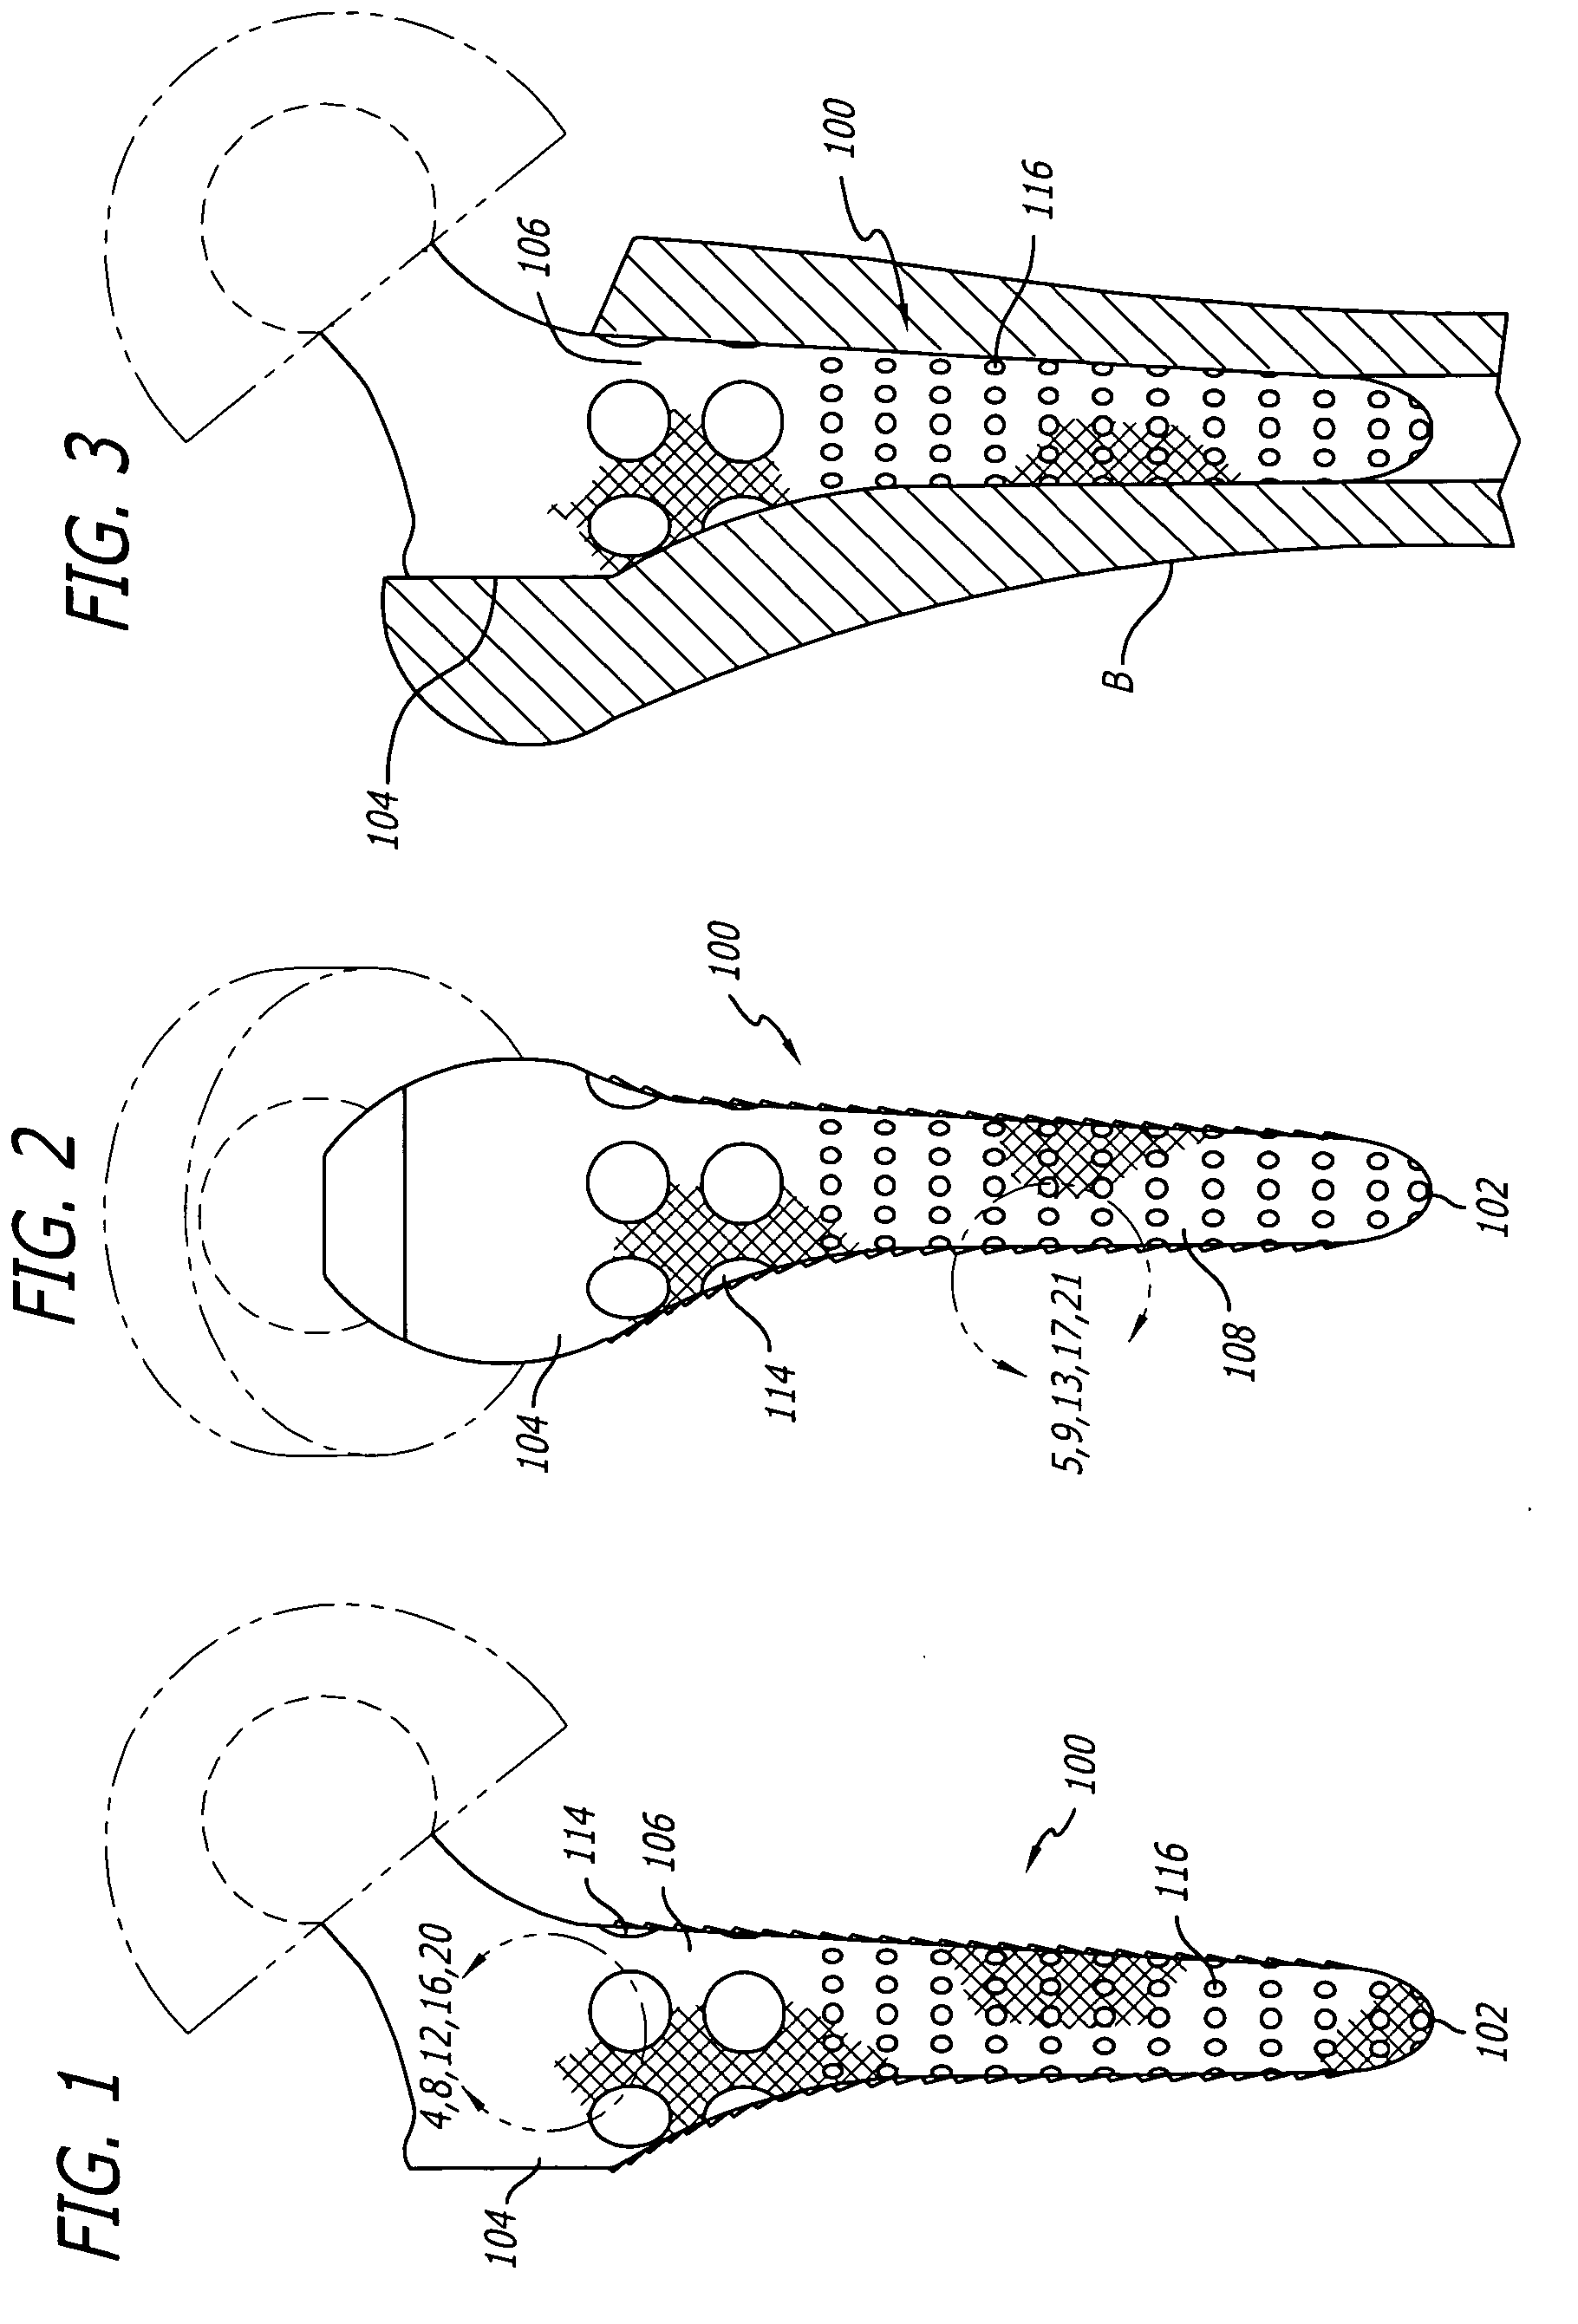 Orthopedic implant surface configuration with a projection having a back cut